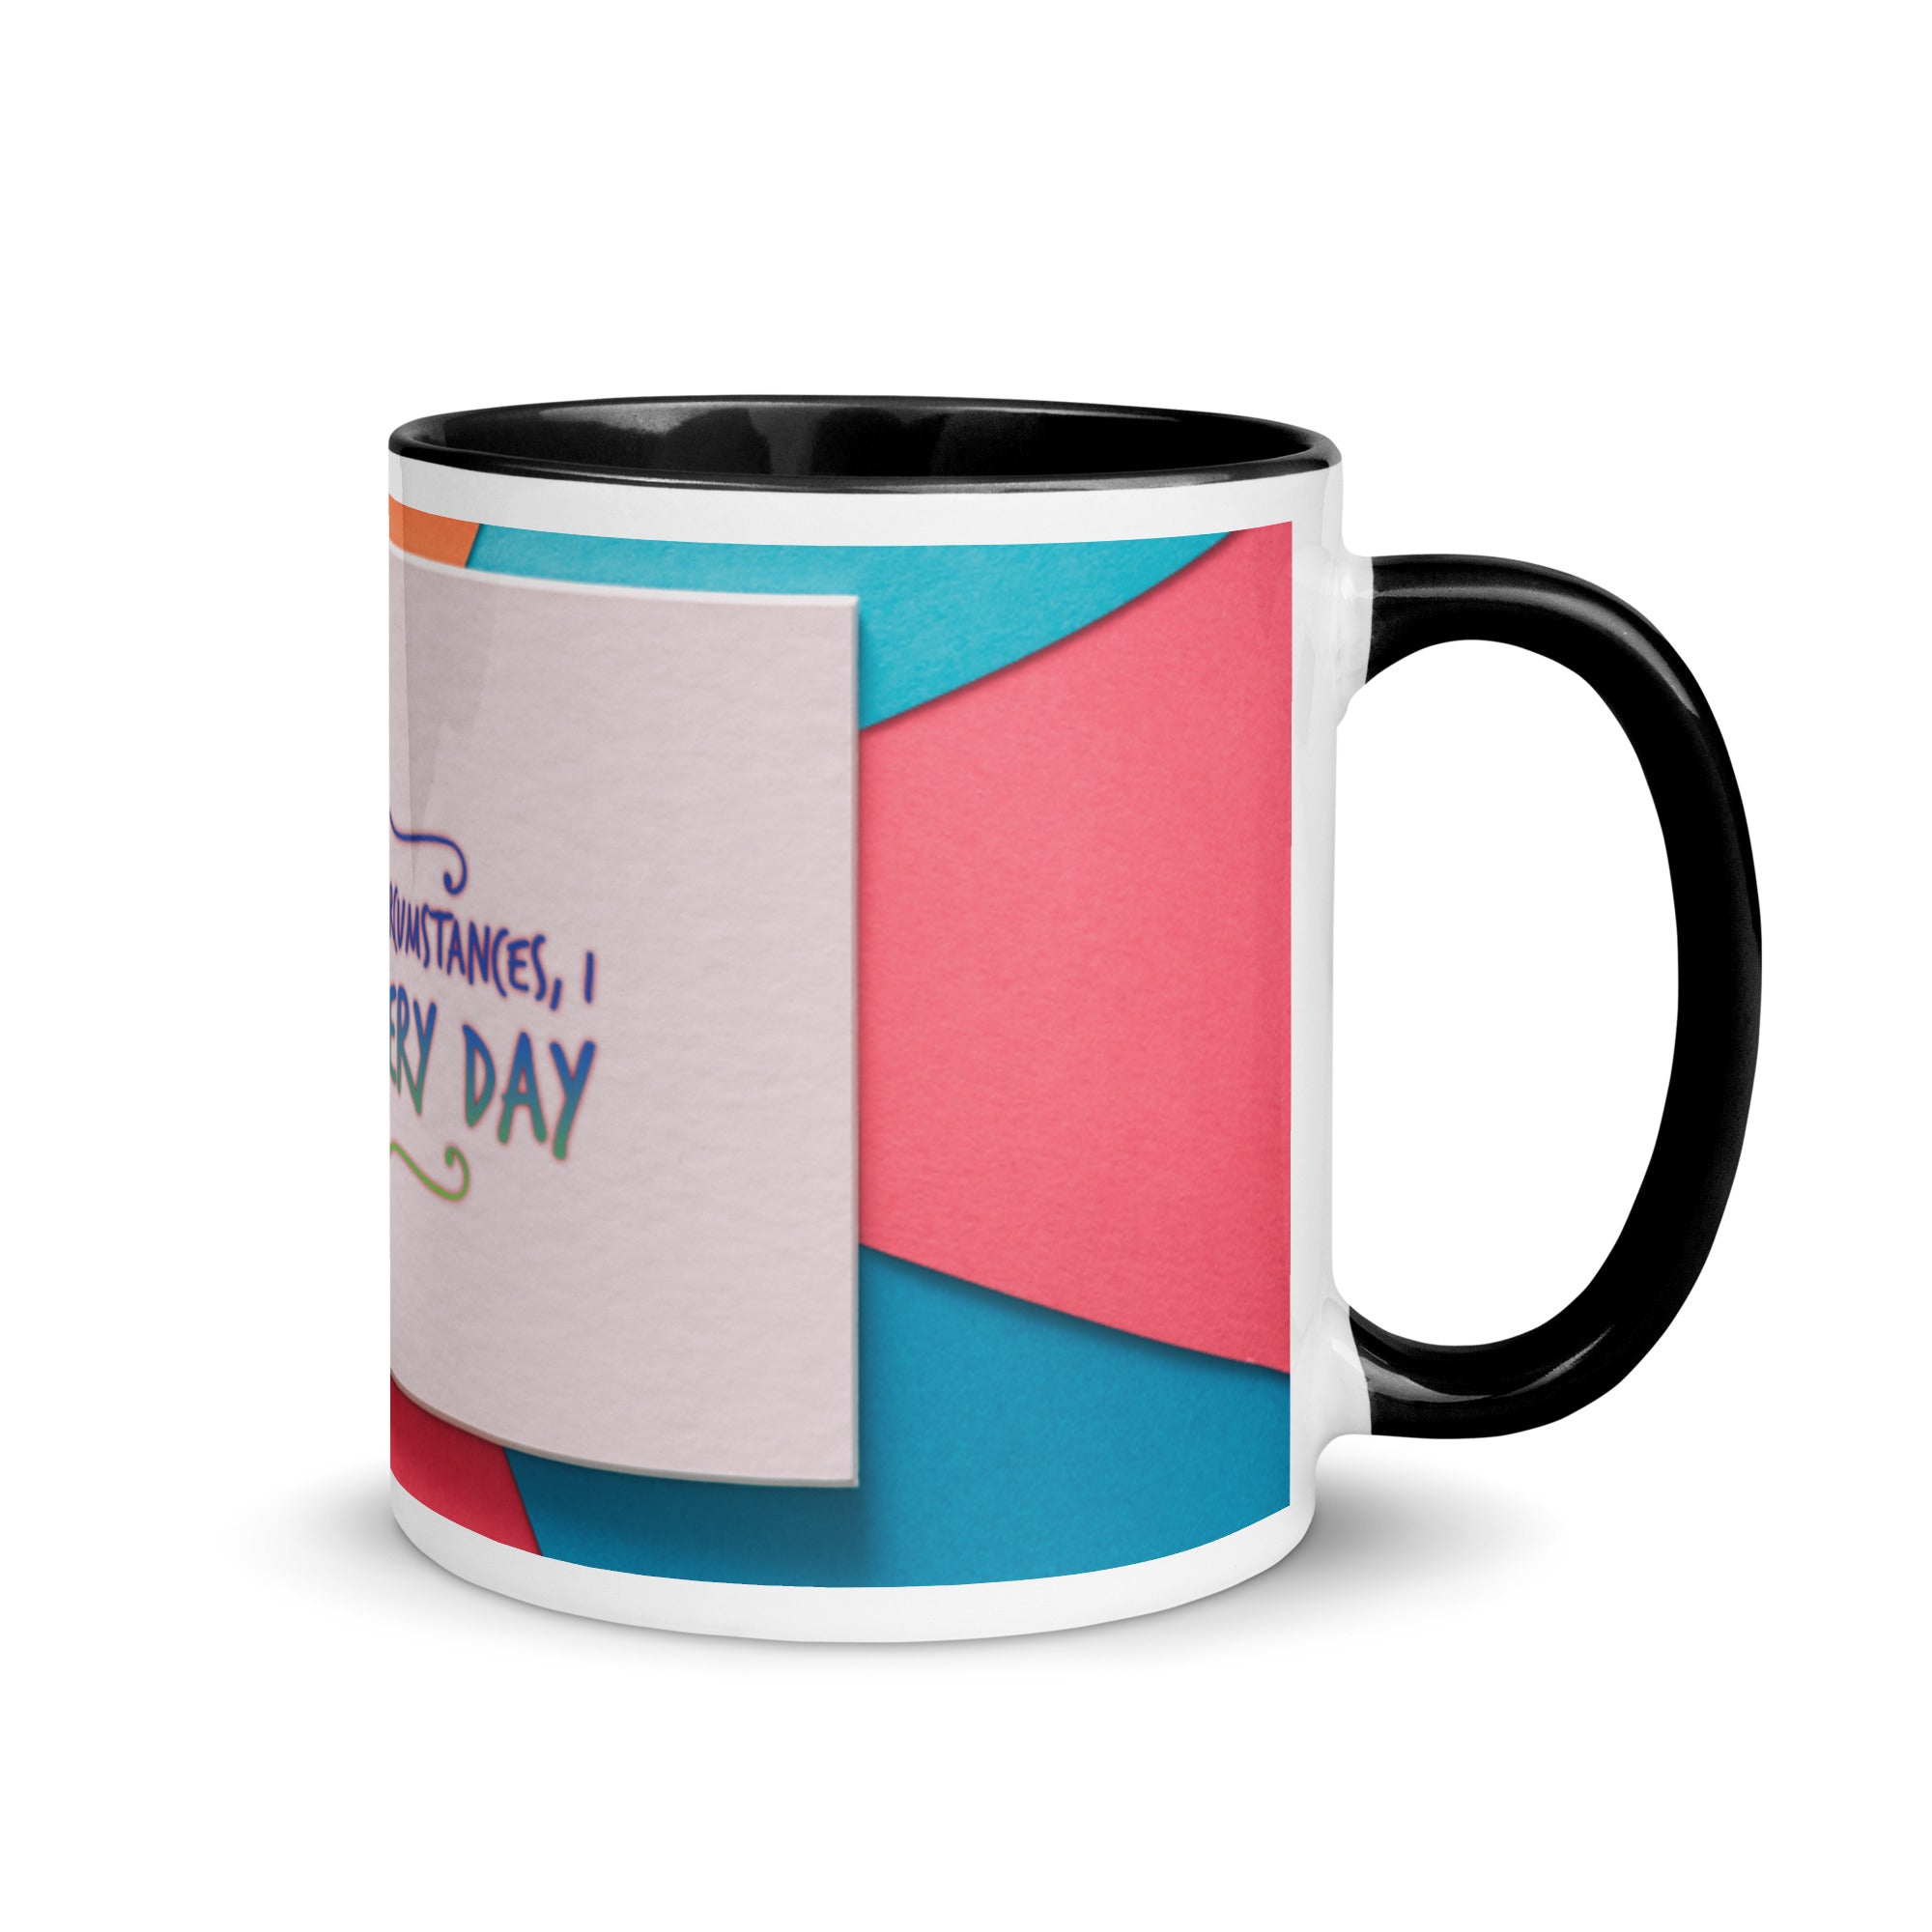 GloWell Designs - Mug with Color Inside - Affirmation Quote - I Smile Every Day - GloWell Designs